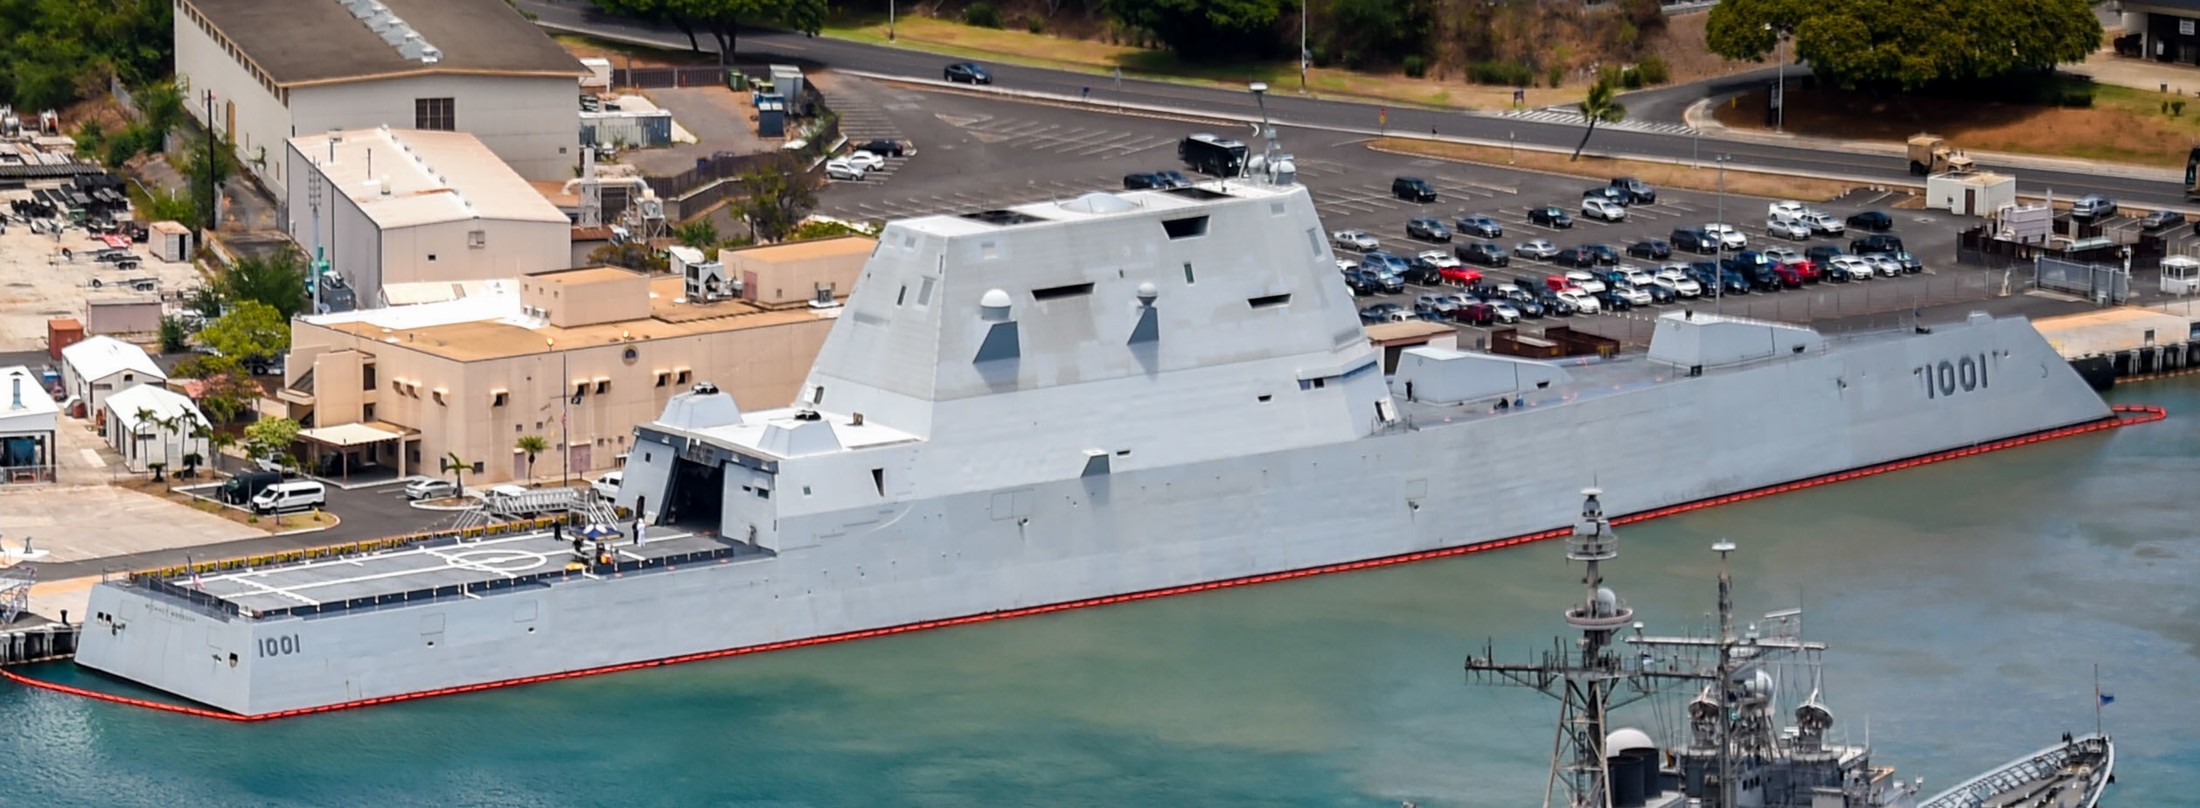 ddg-1001 uss michael monsoor zumwalt class guided missile destroyer us navy joint base pearl harbor hickam hawaii 39